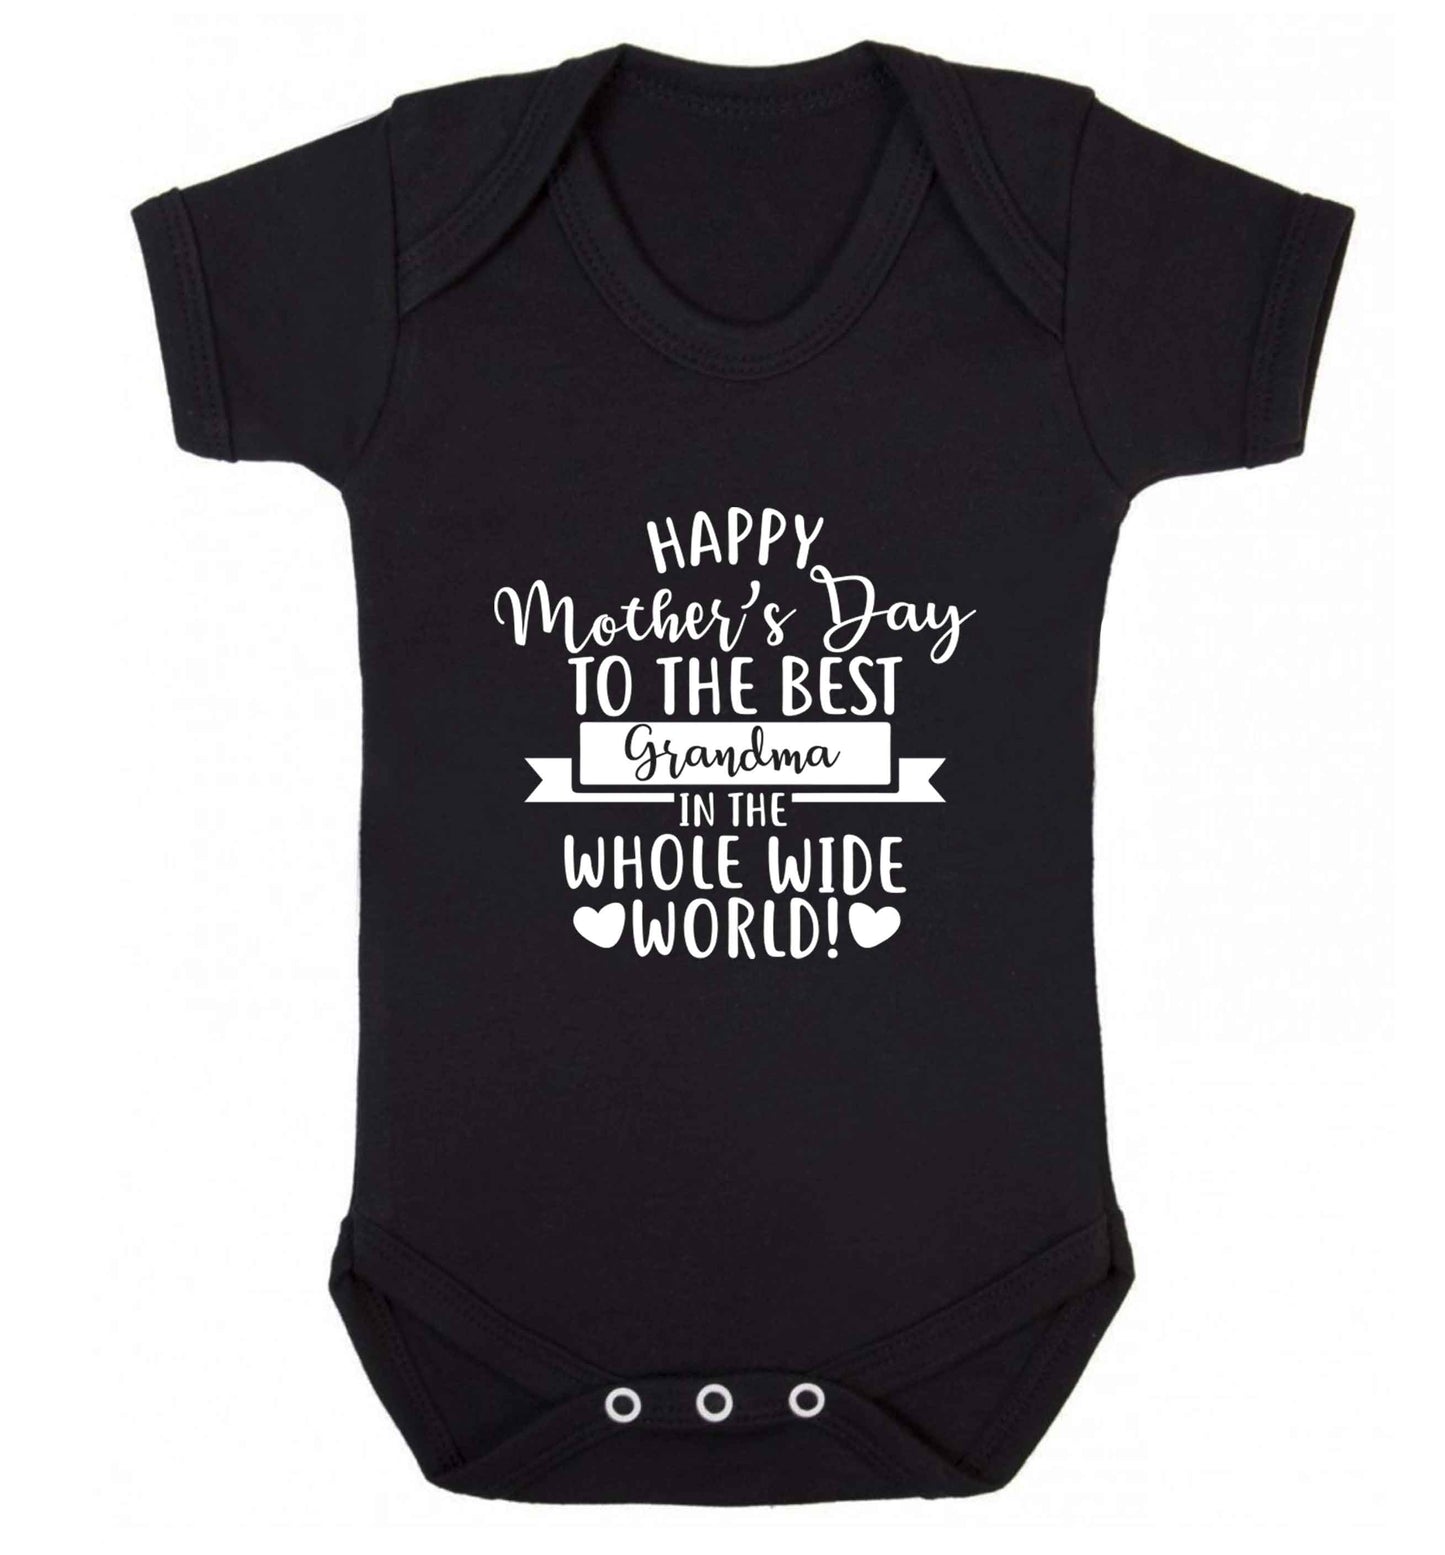 Happy mother's day to the best grandma in the world baby vest black 18-24 months